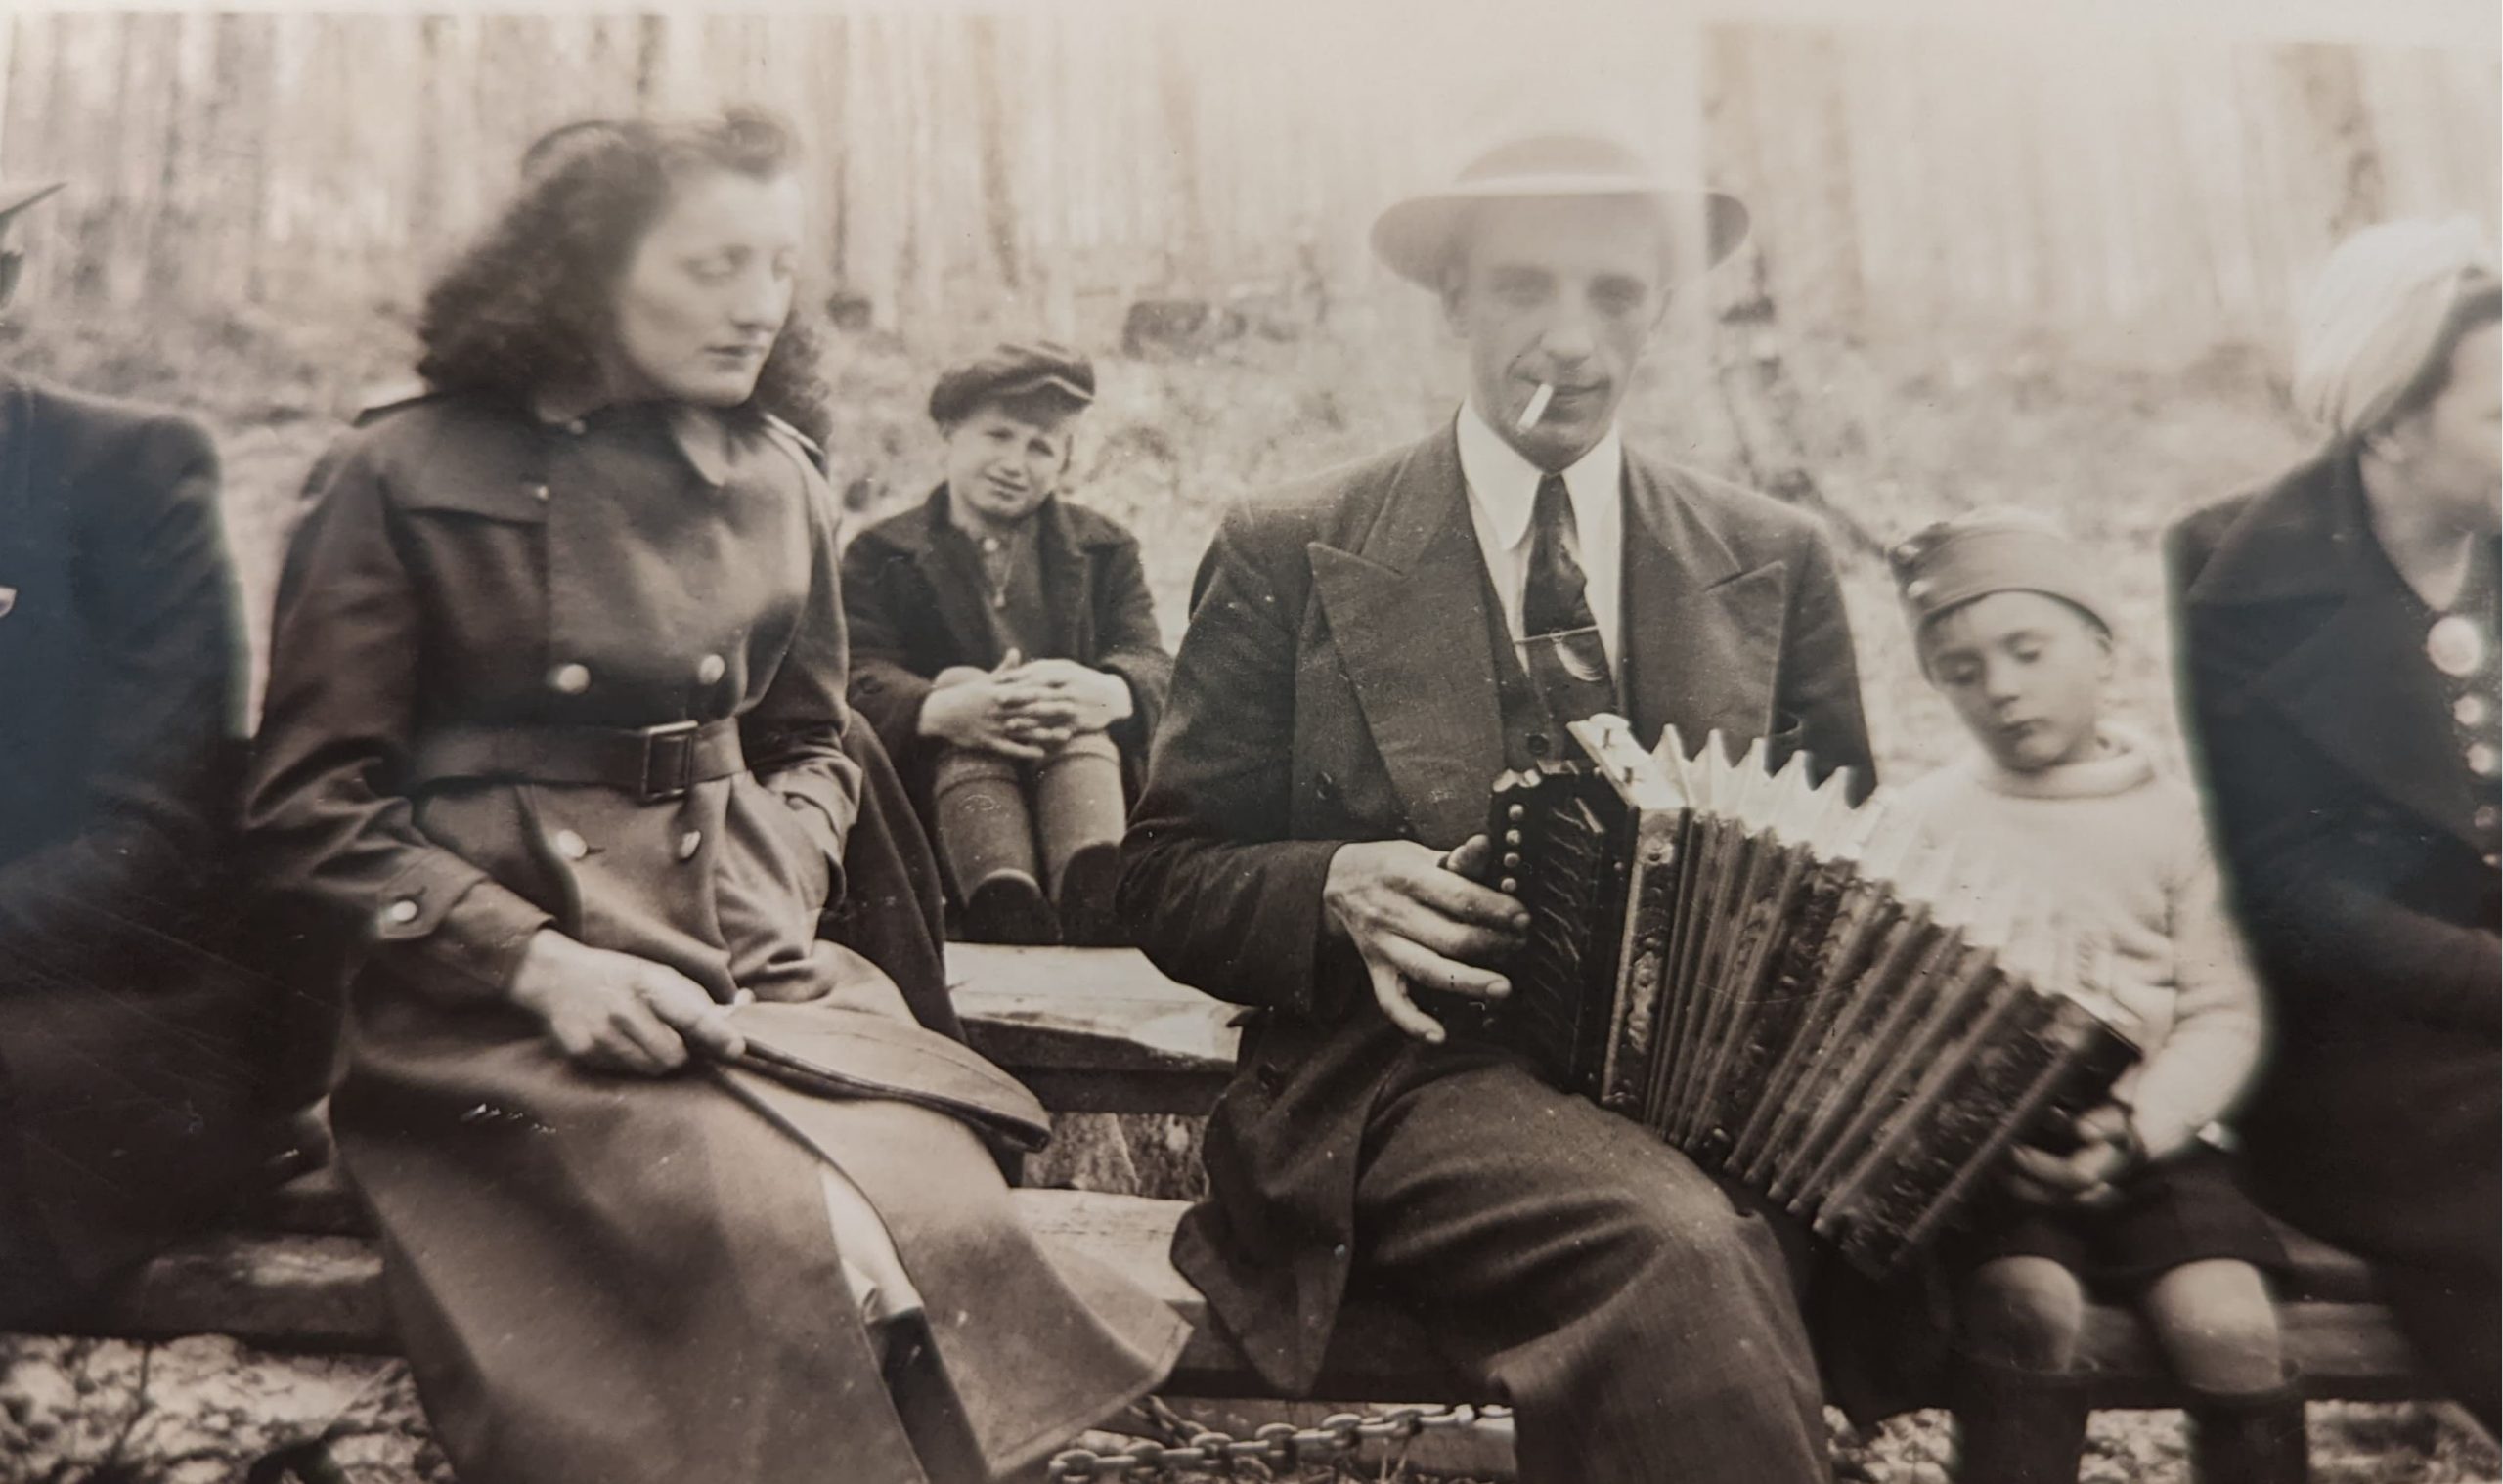 Black and white photograph of accordionist Fernand Fraser playing an accordion on his lap, during a sugaring-off party. A woman is seated next to him, and a child is in the background.